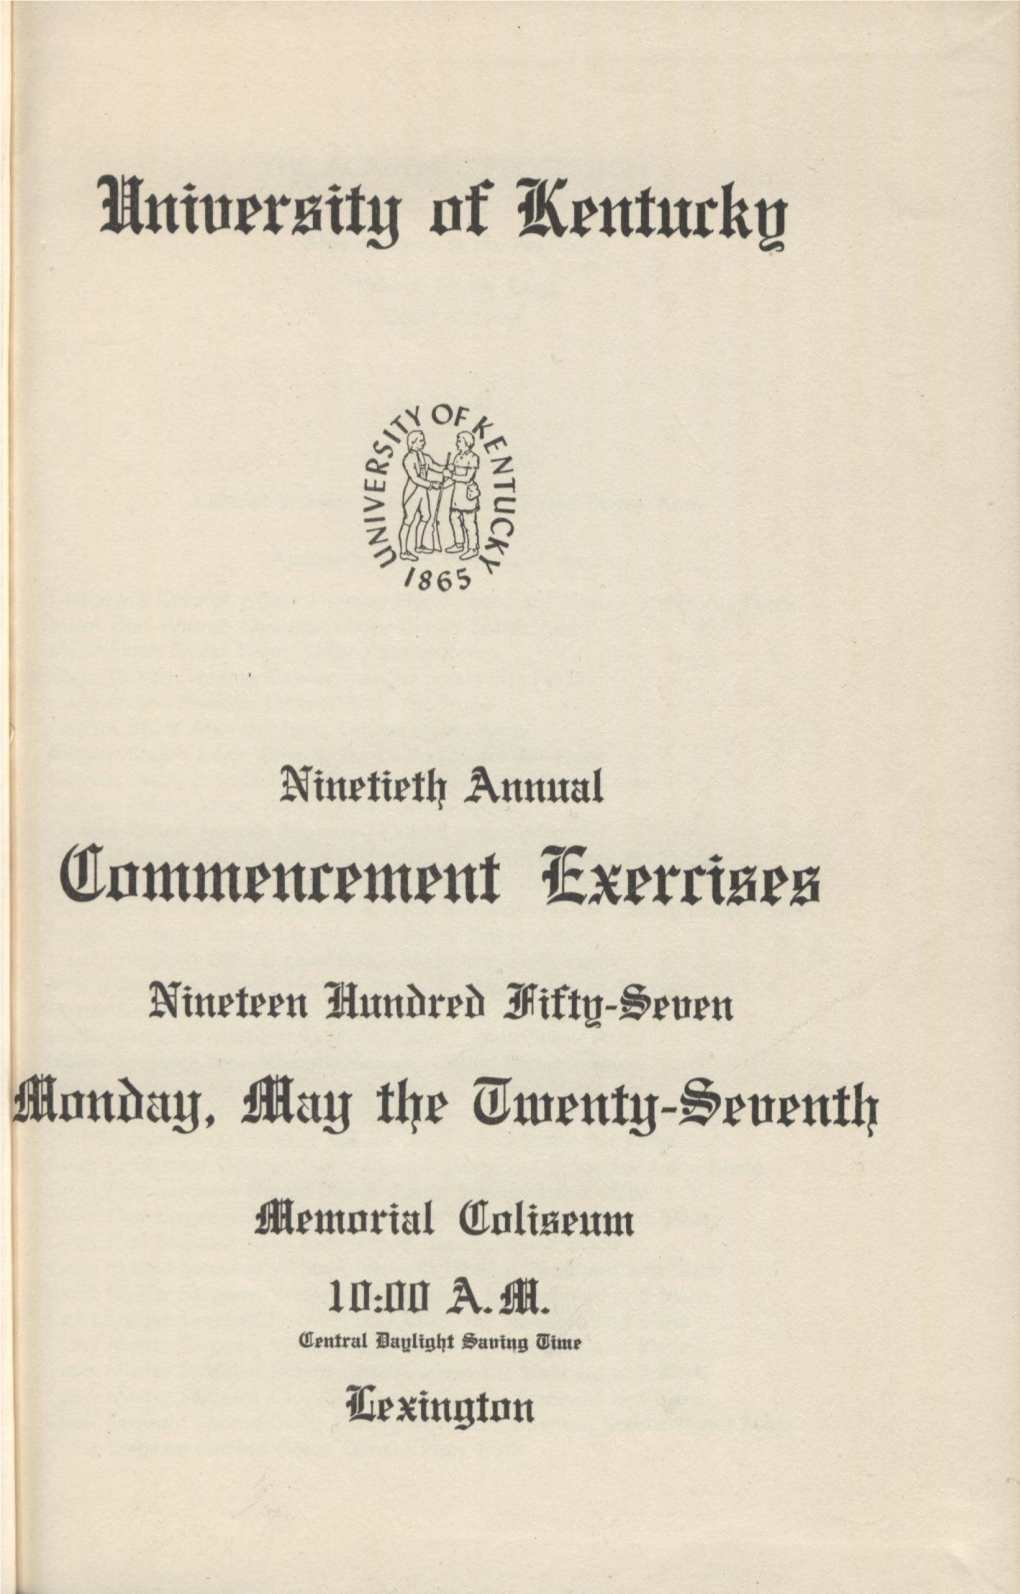 College of Law Commencement Program, 1957